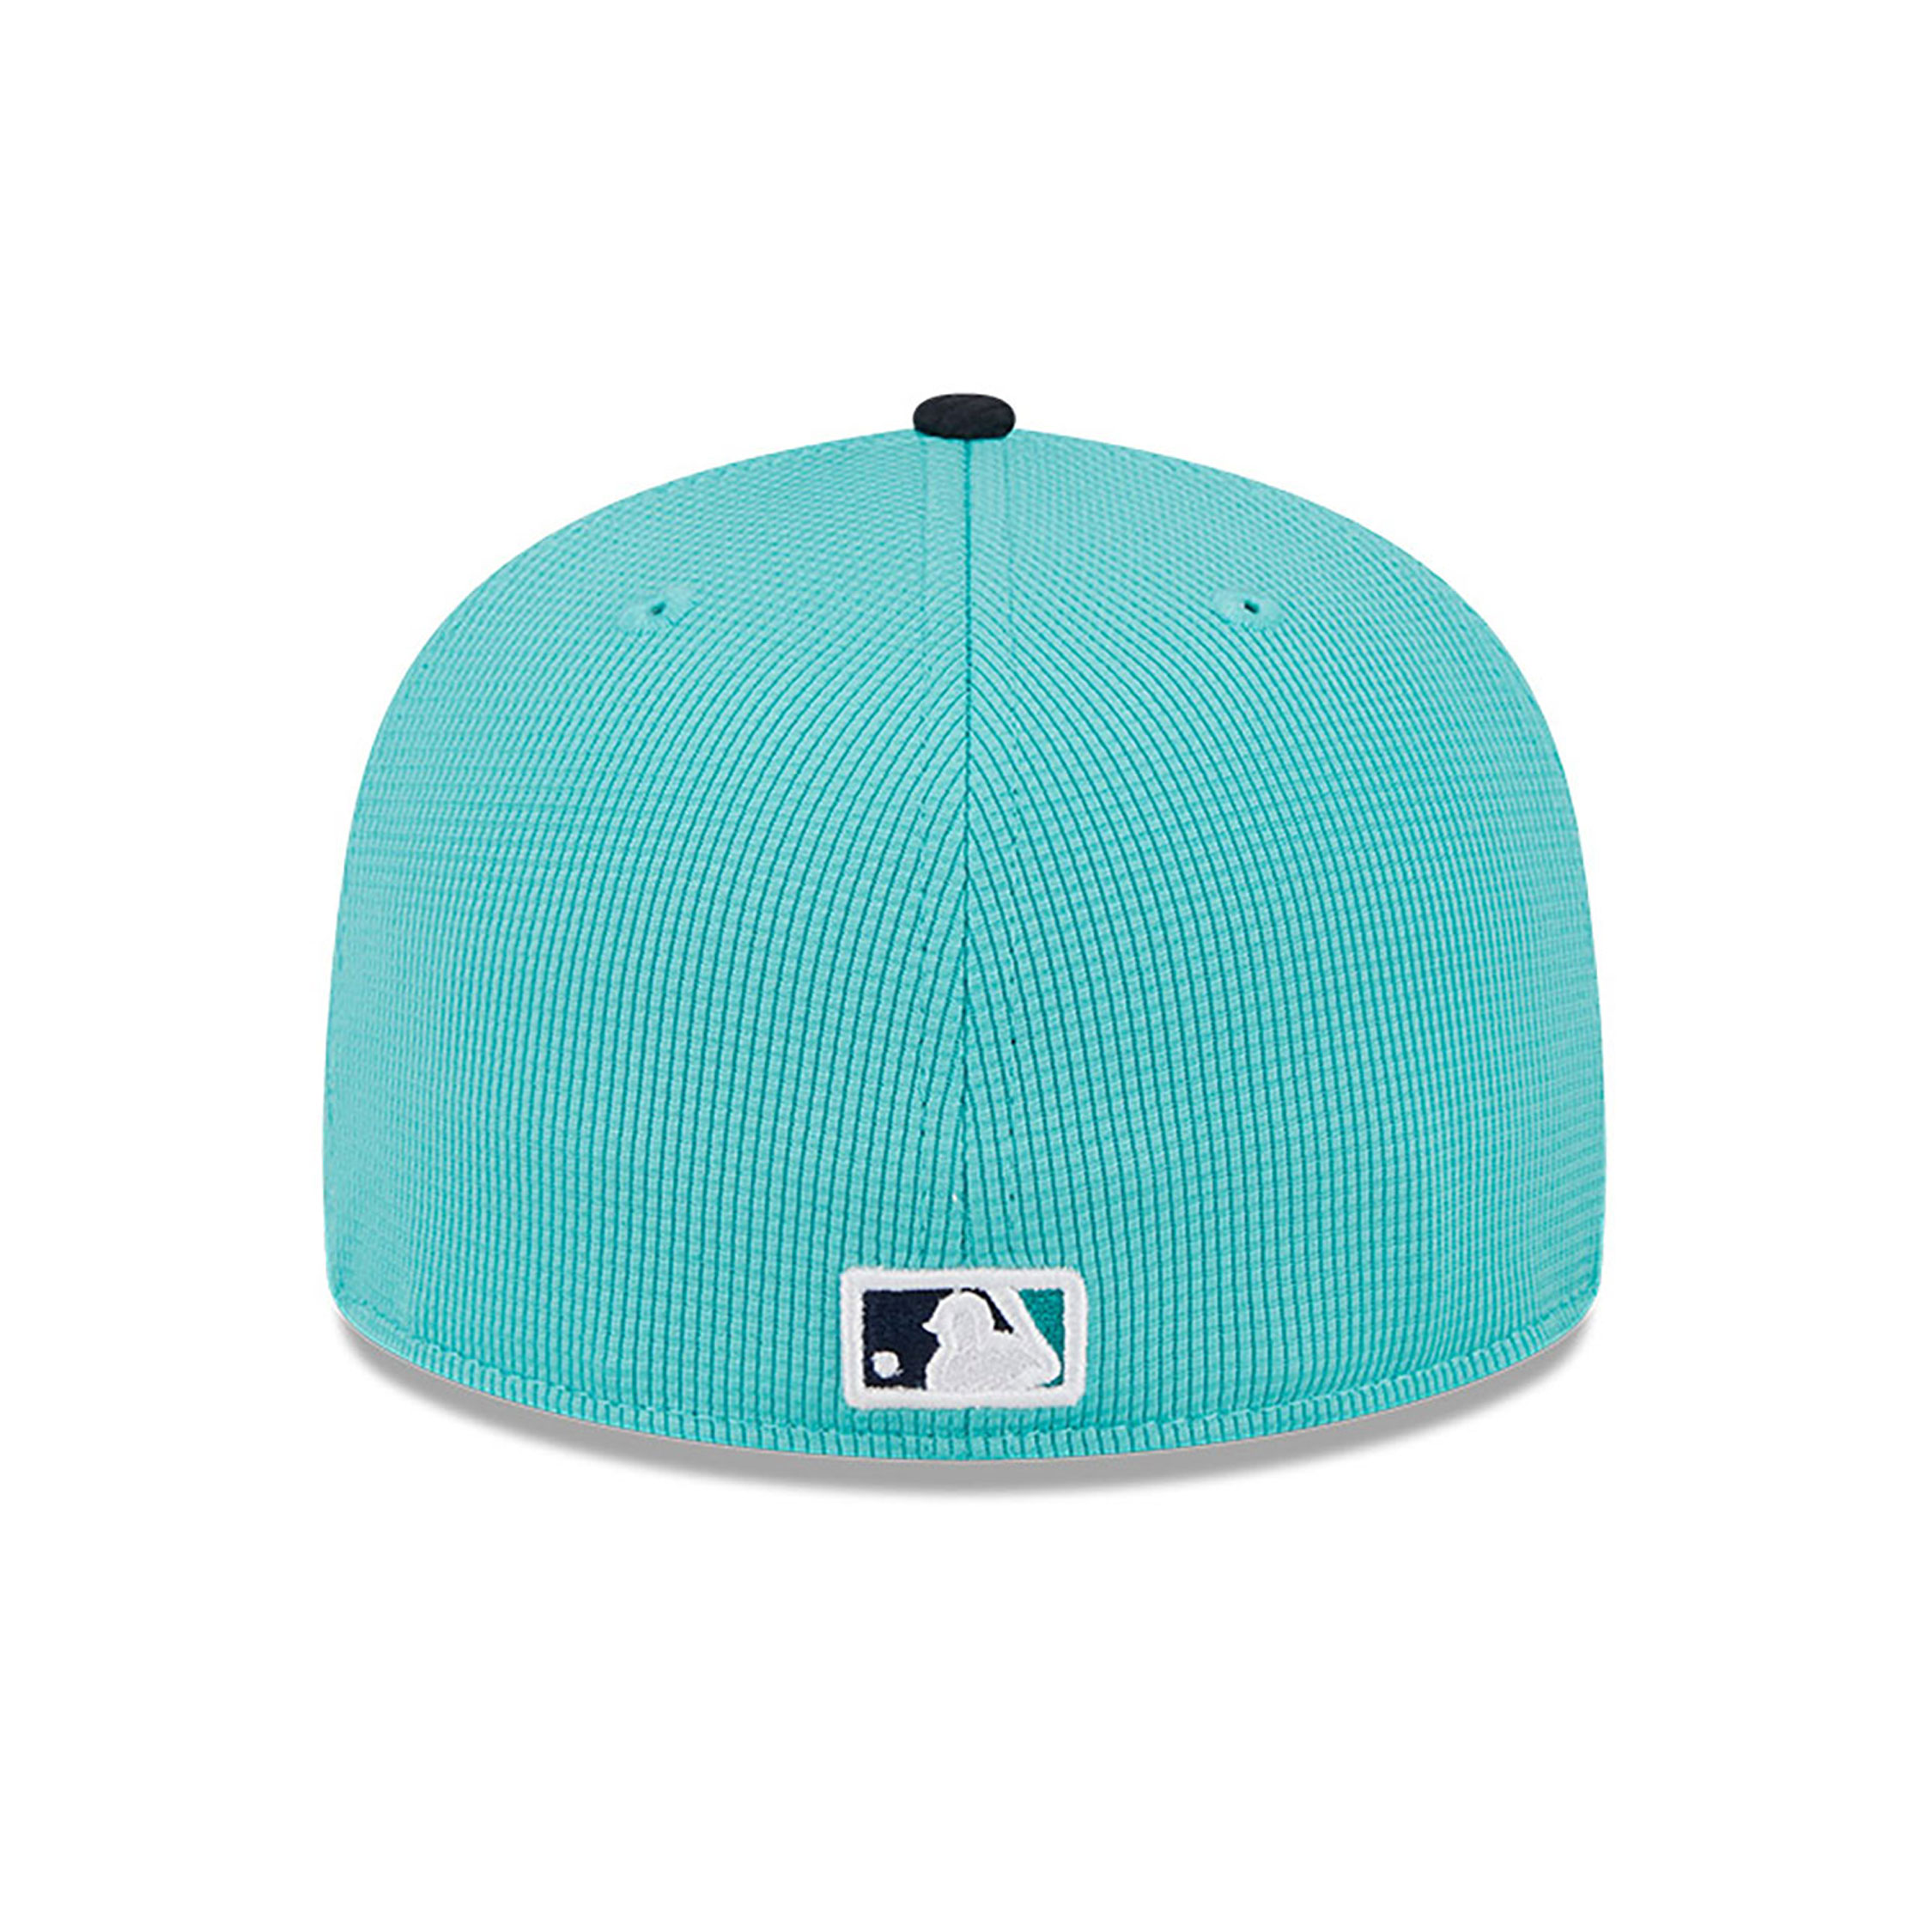 Seattle Mariners Spring Training Turquoise 59FIFTY Fitted Cap